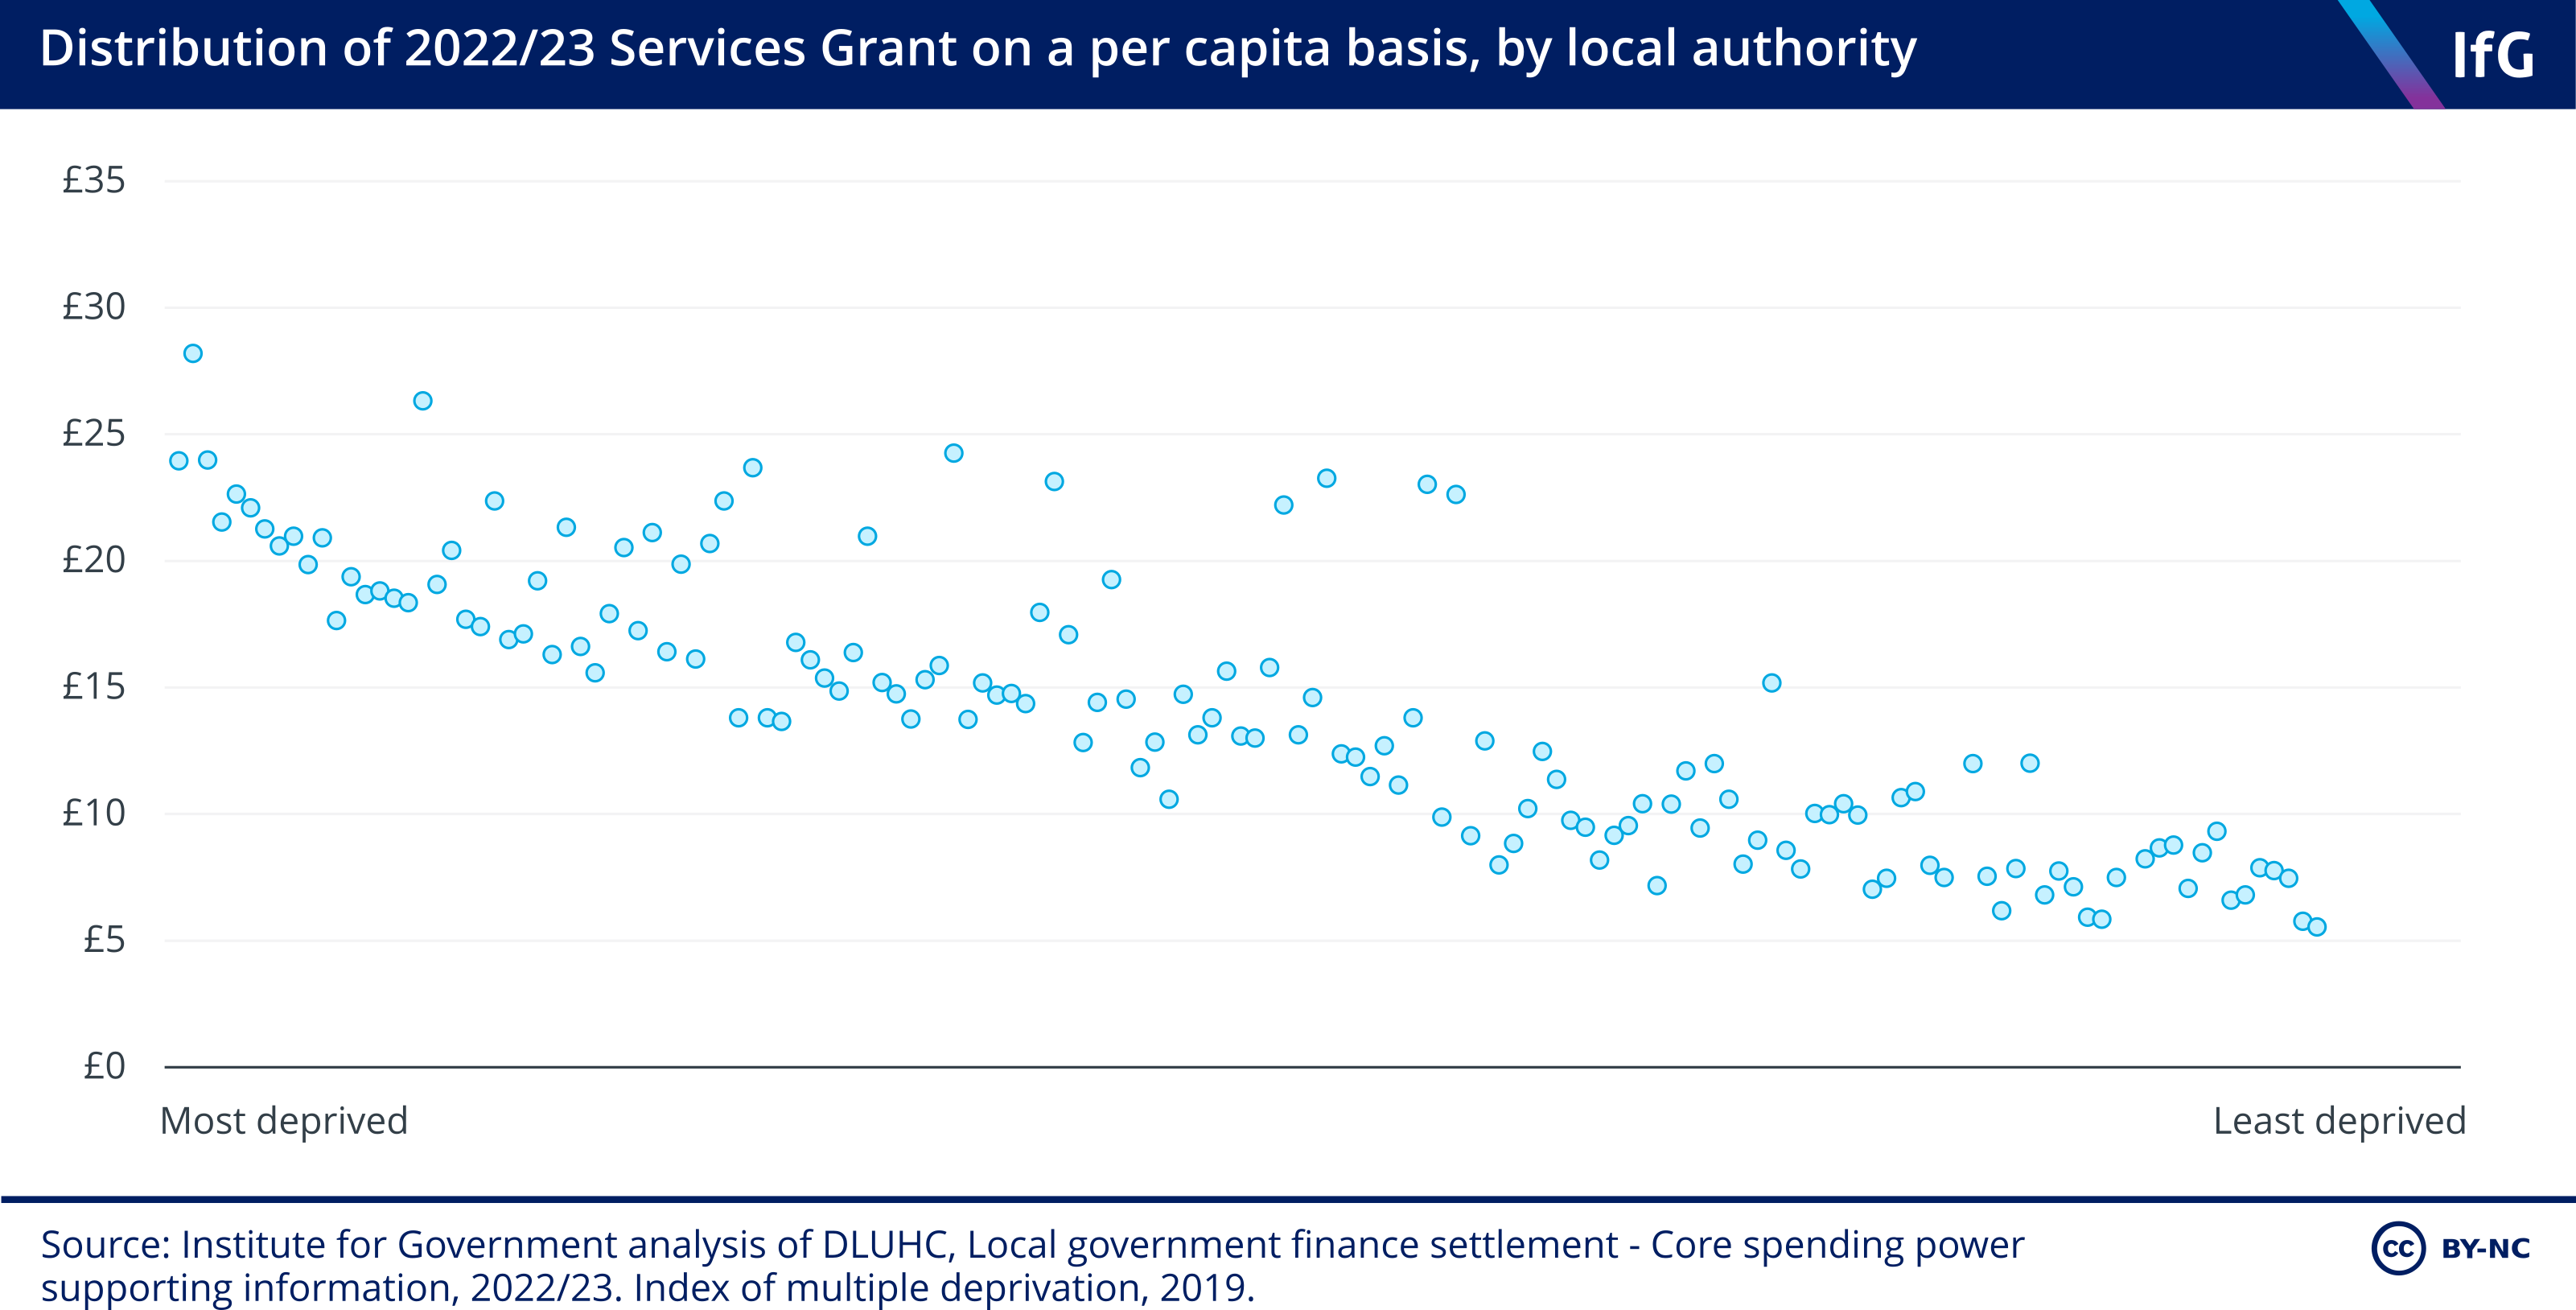 Distribution of 2022/23 Services Grant on a per capita basis, by local authority